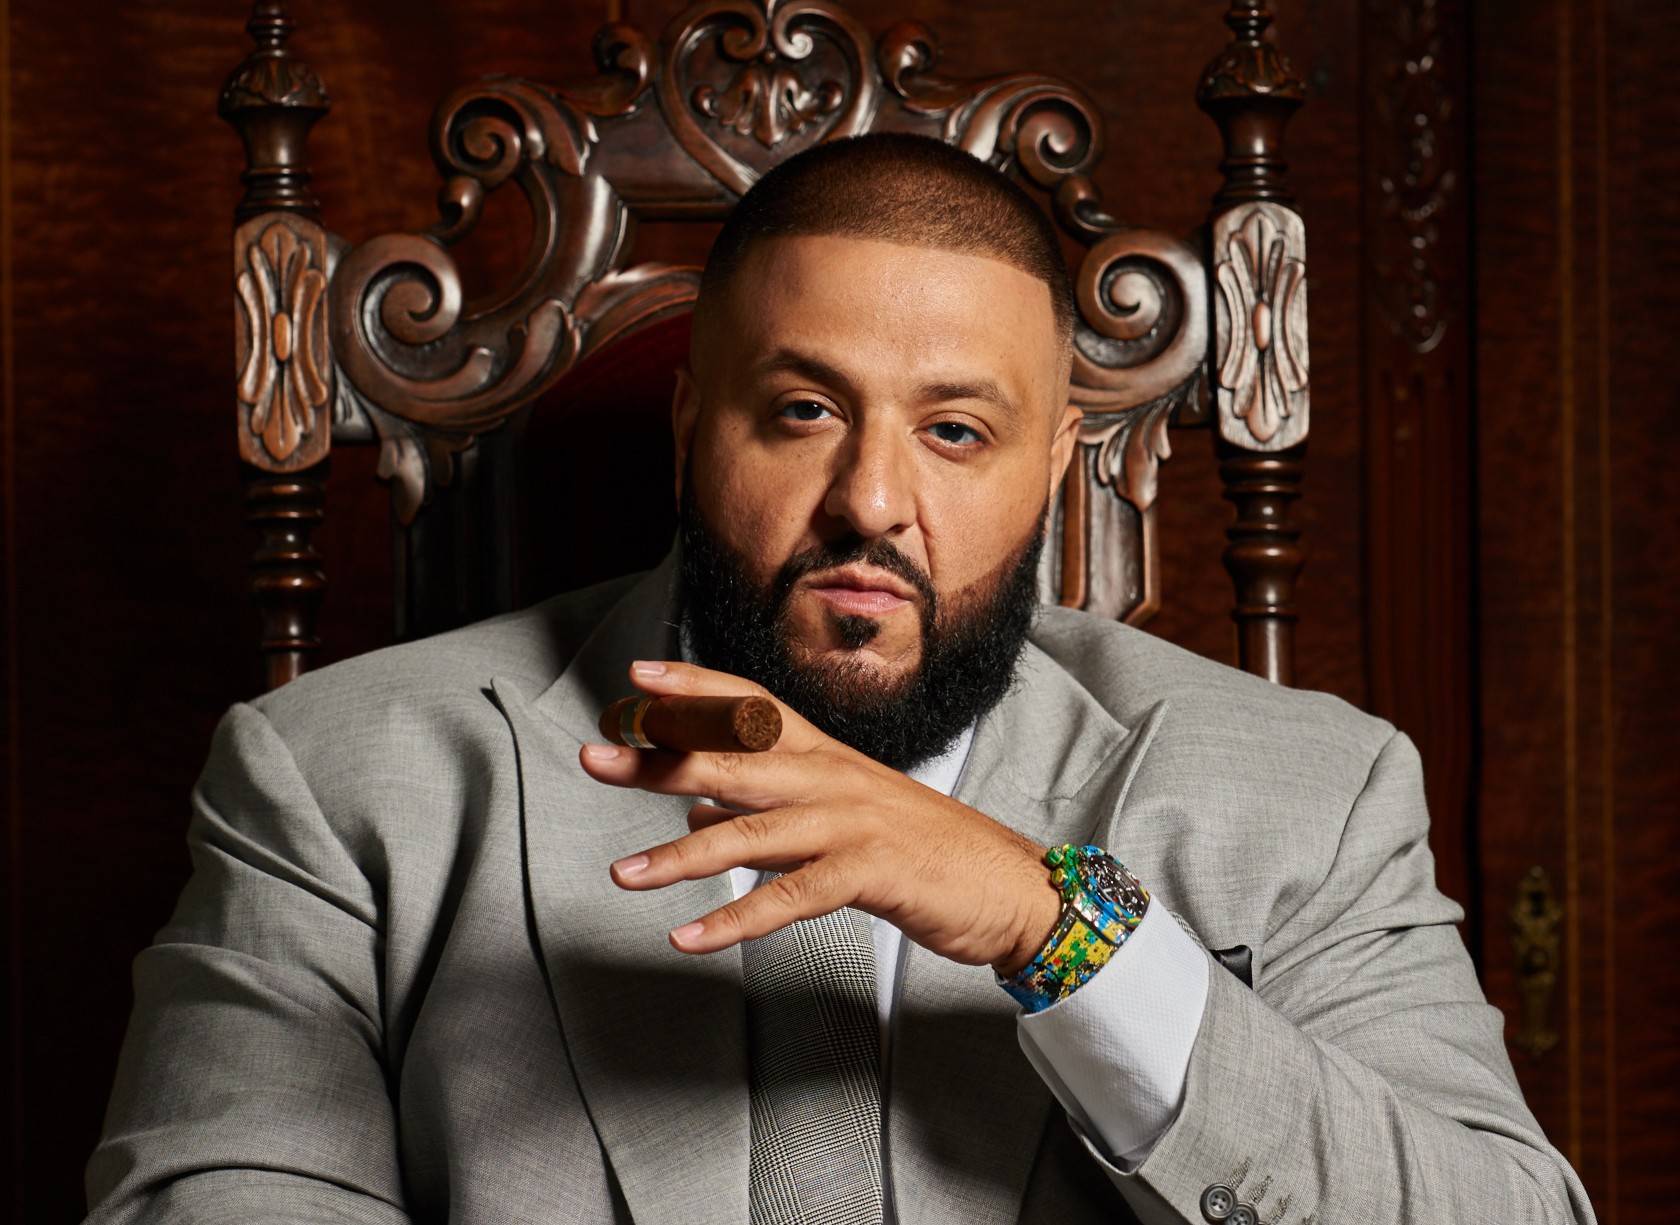 One on One: Five Minutes With DJ Khaled On His Luxury Watch Collection